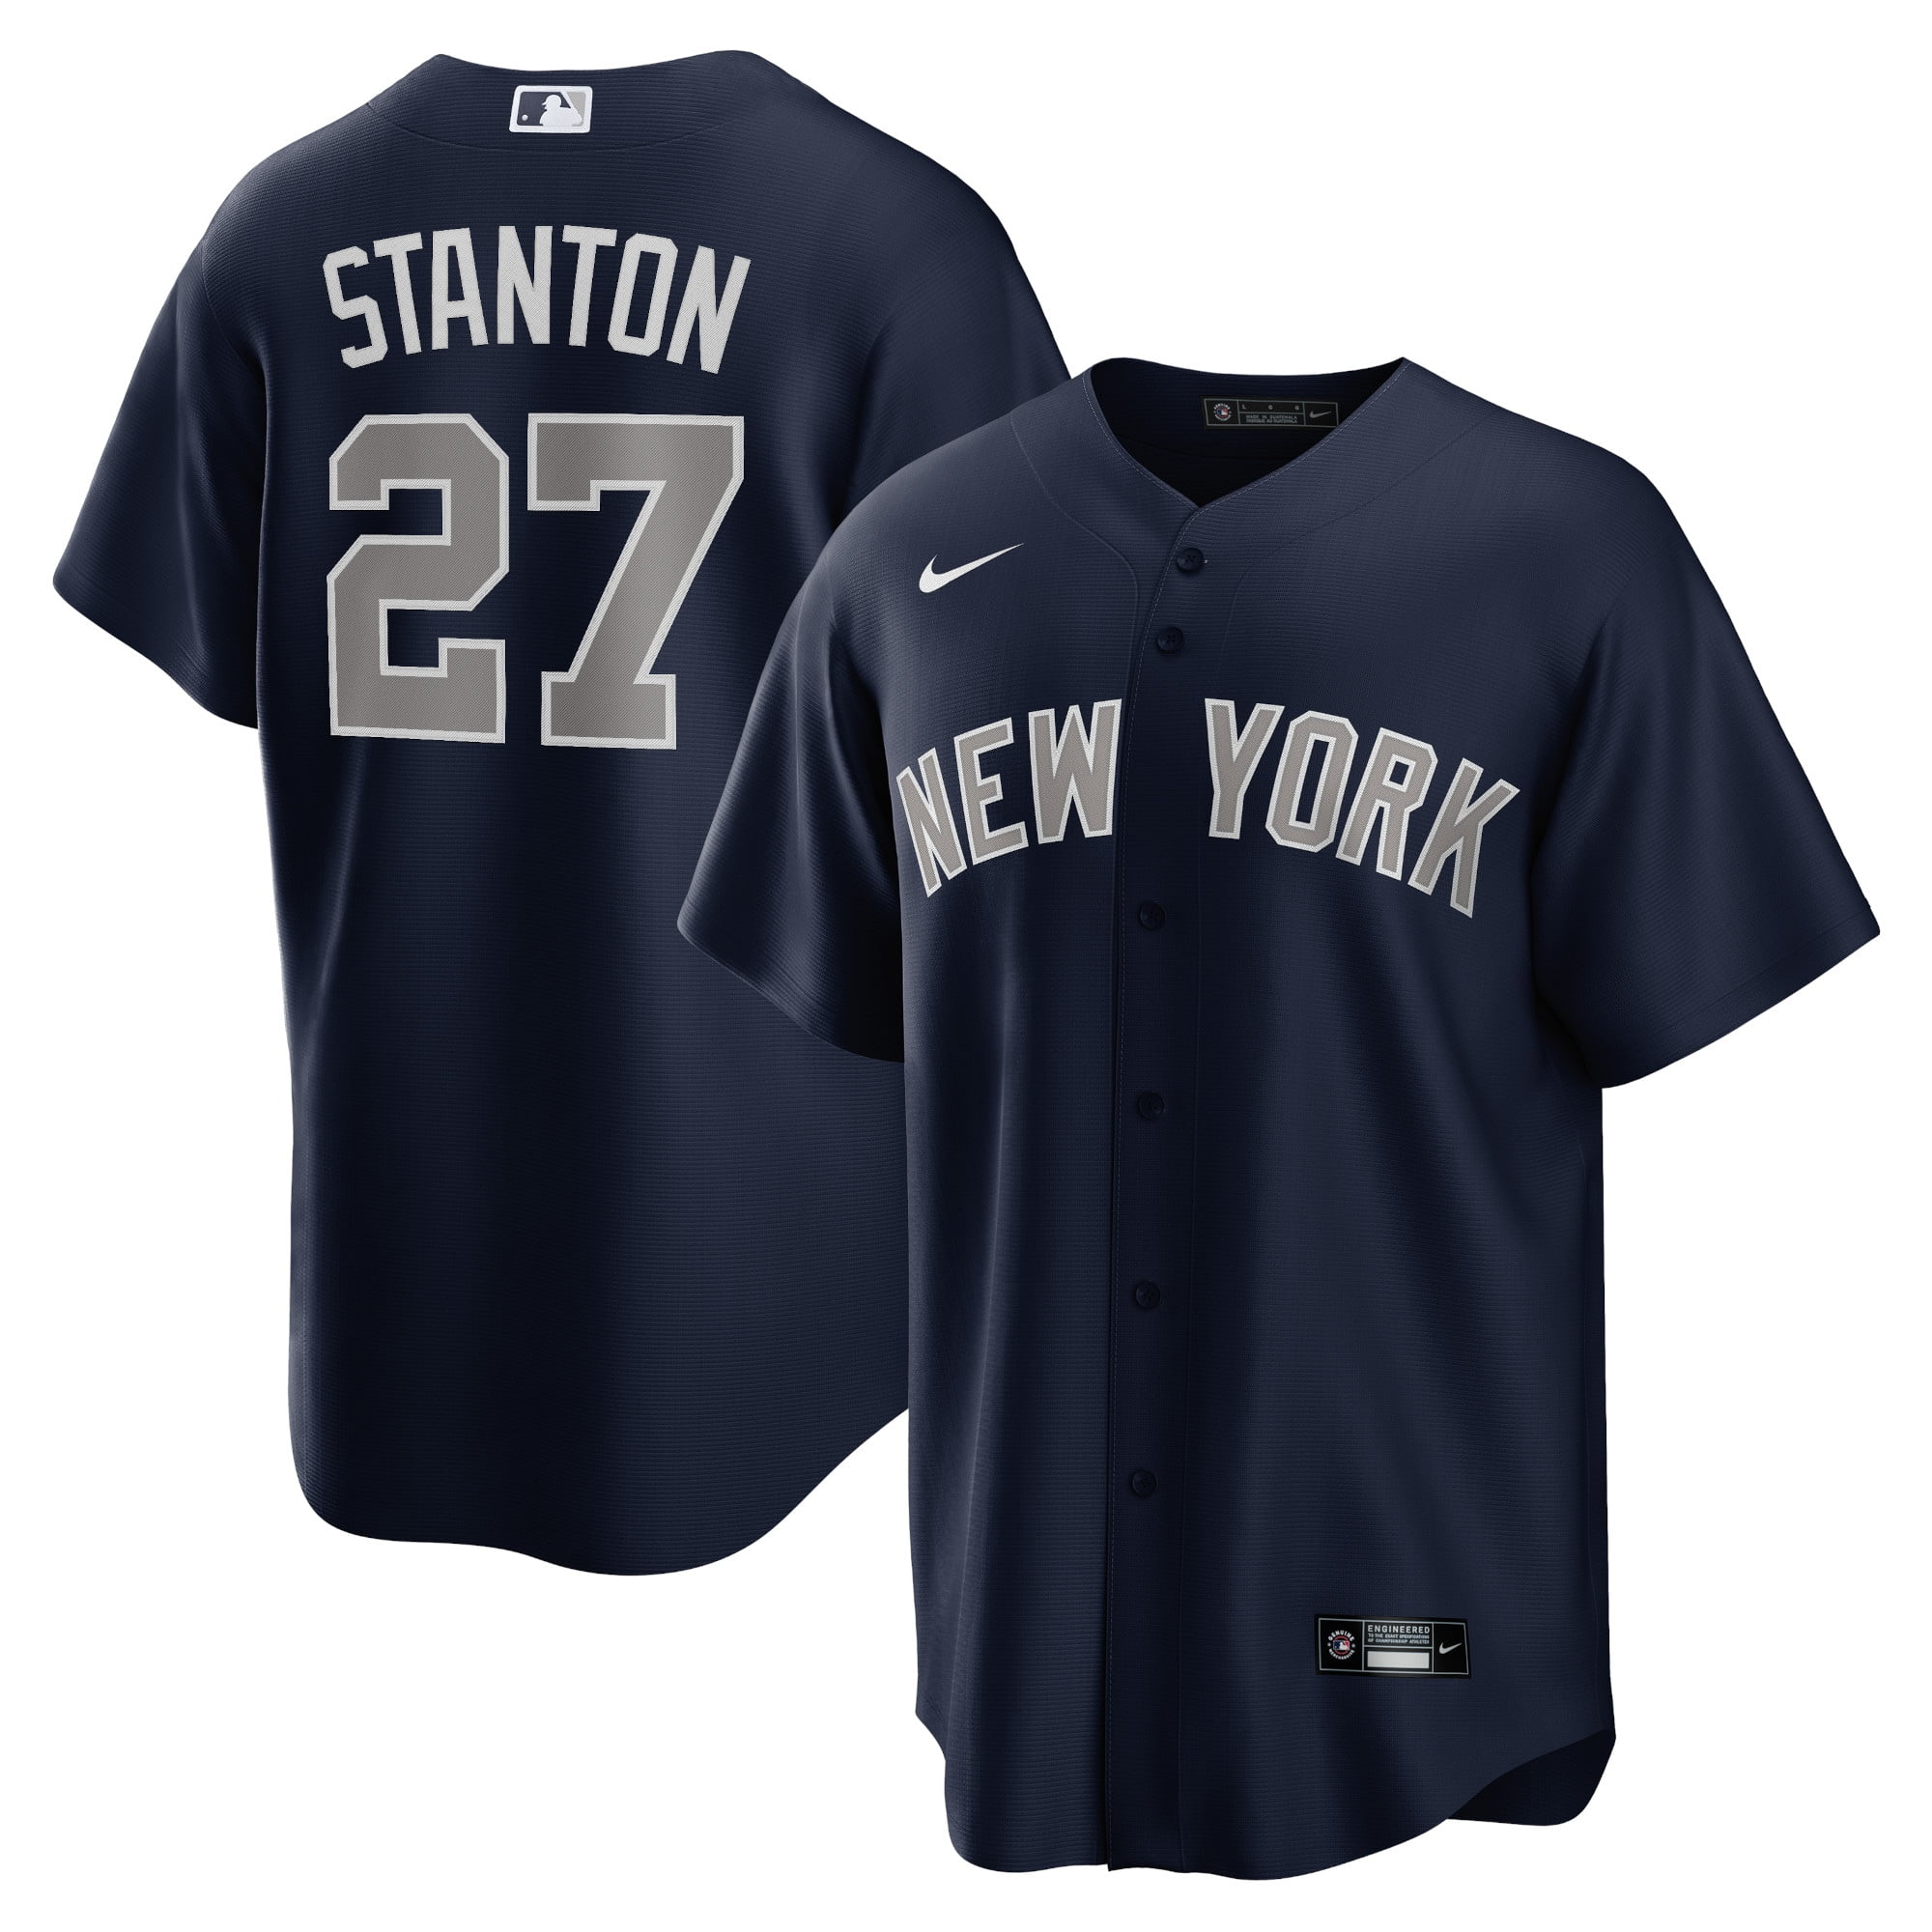 stanton jersey yankees,Save up to 19%,www.ilcascinone.com